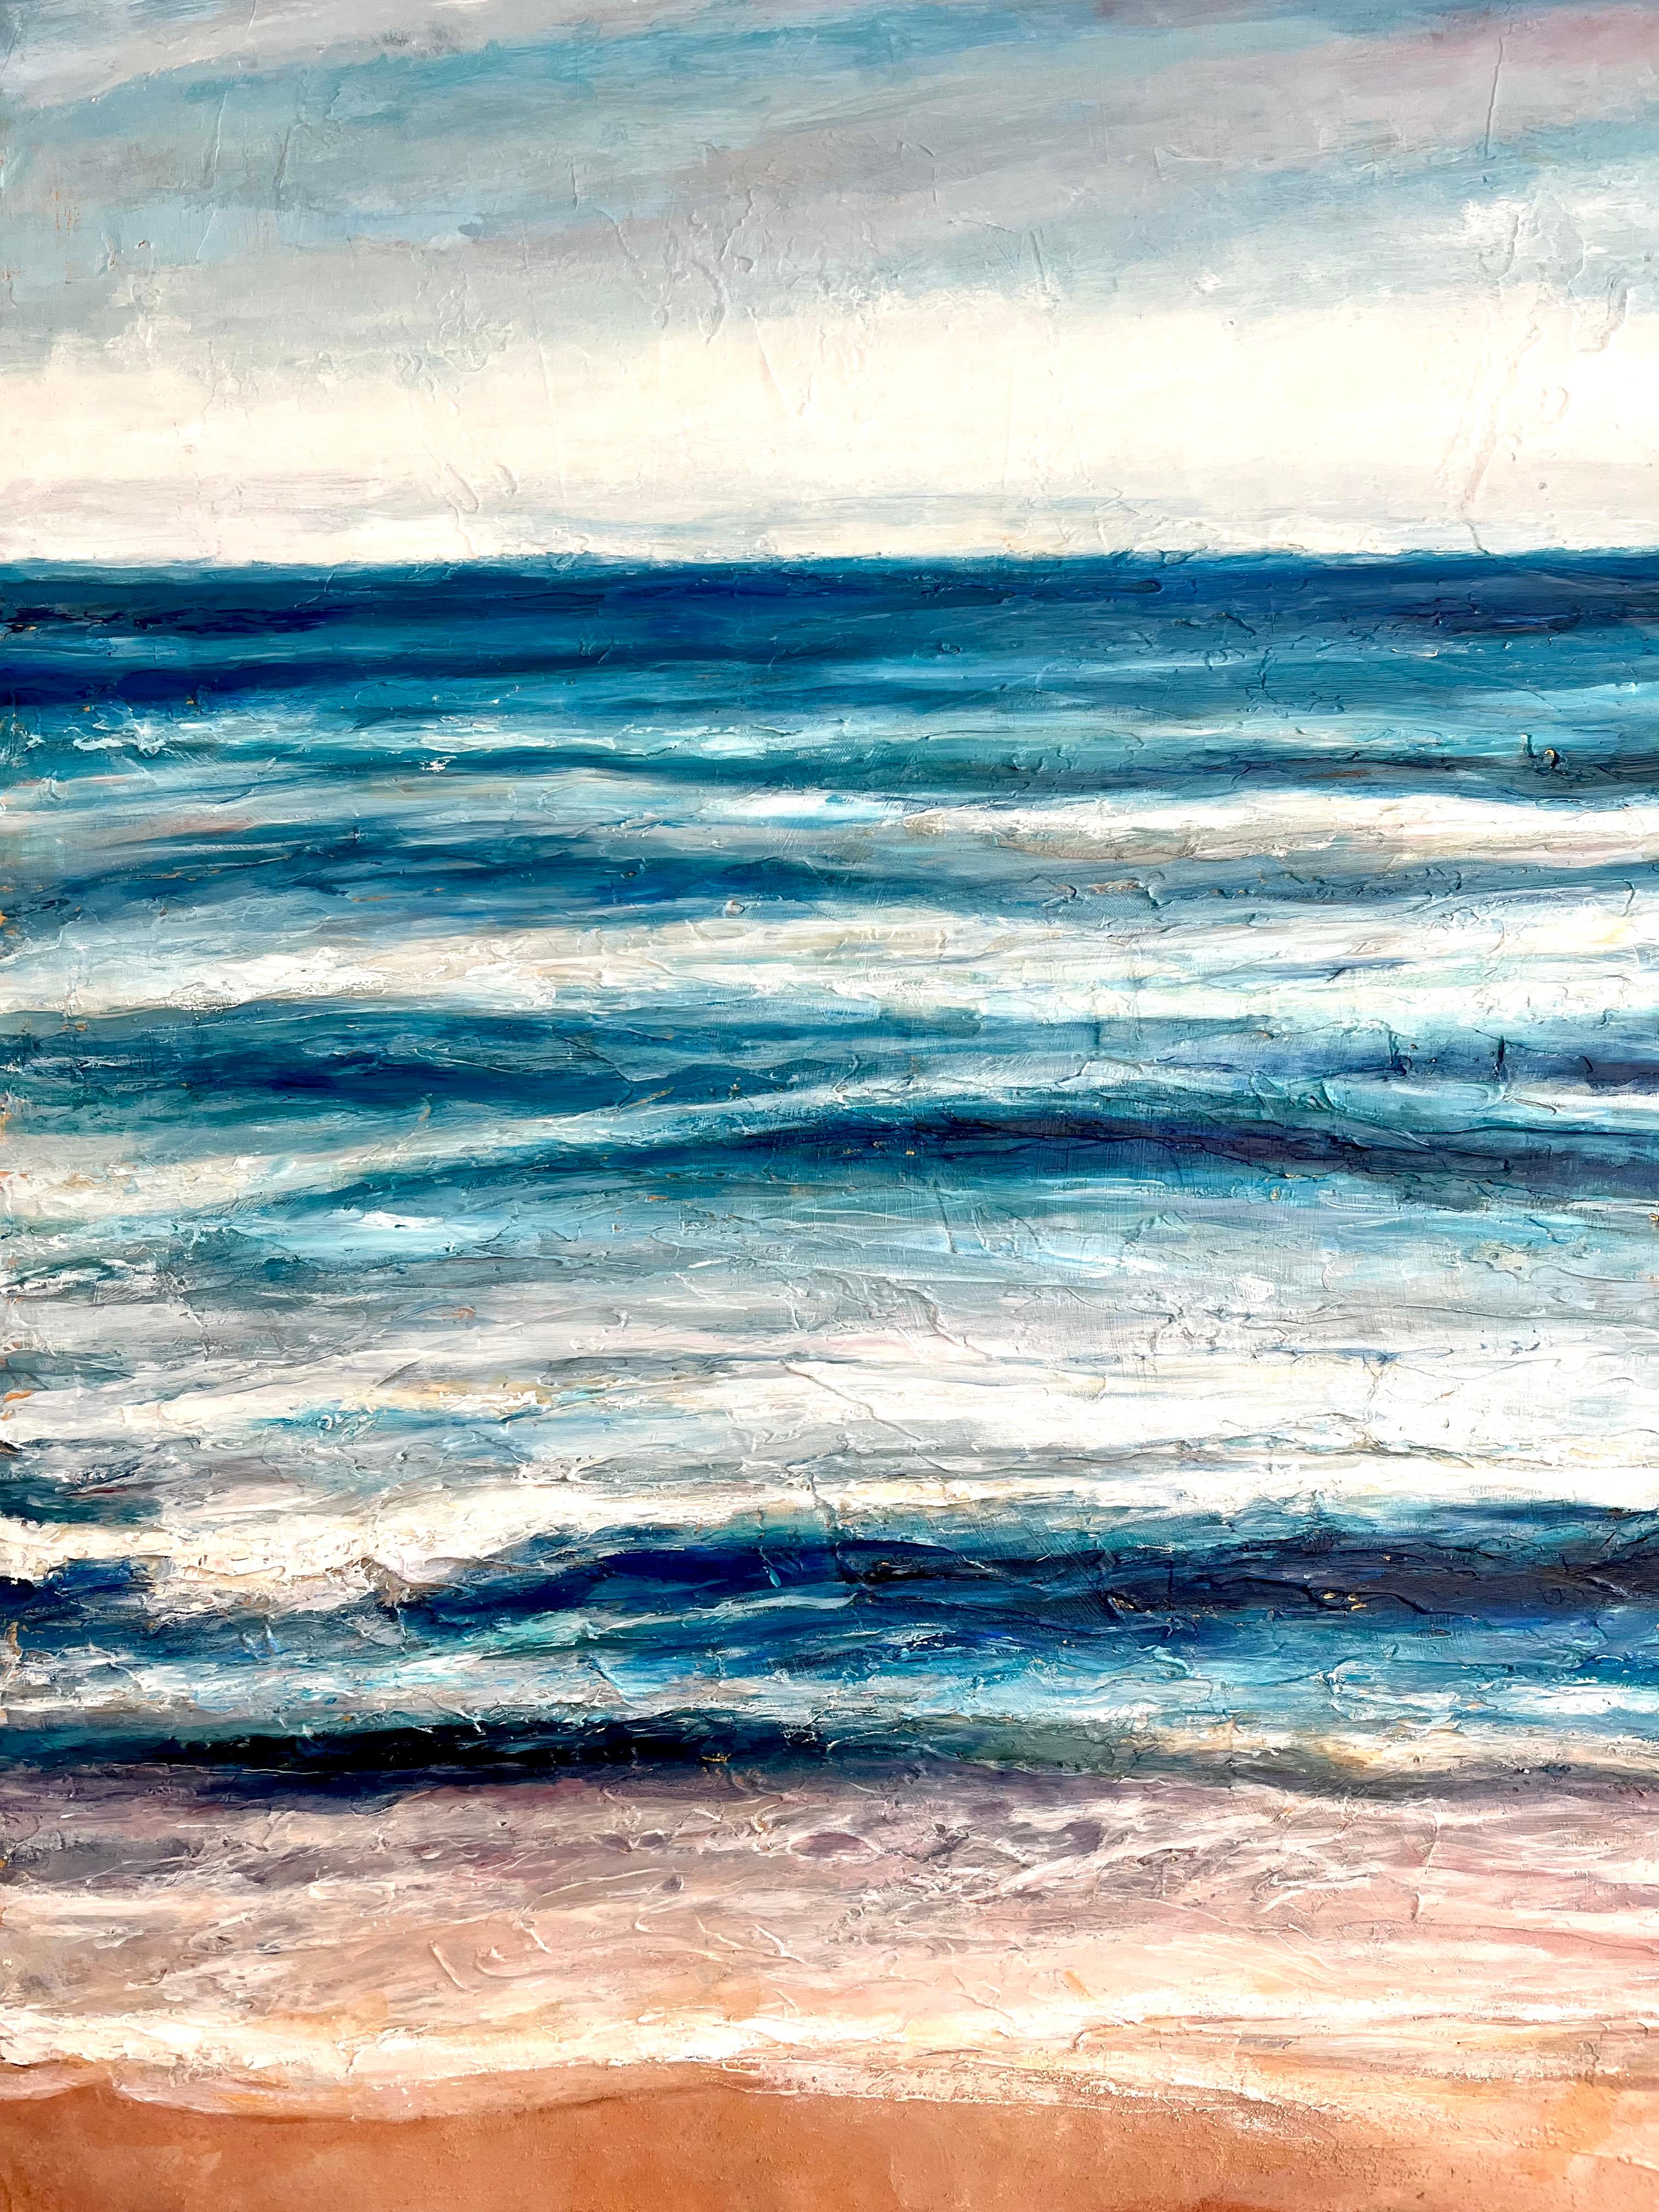 Where the Sea Meets the Sky, Abstract Painting - Mixed Media Art by Nava Lundy